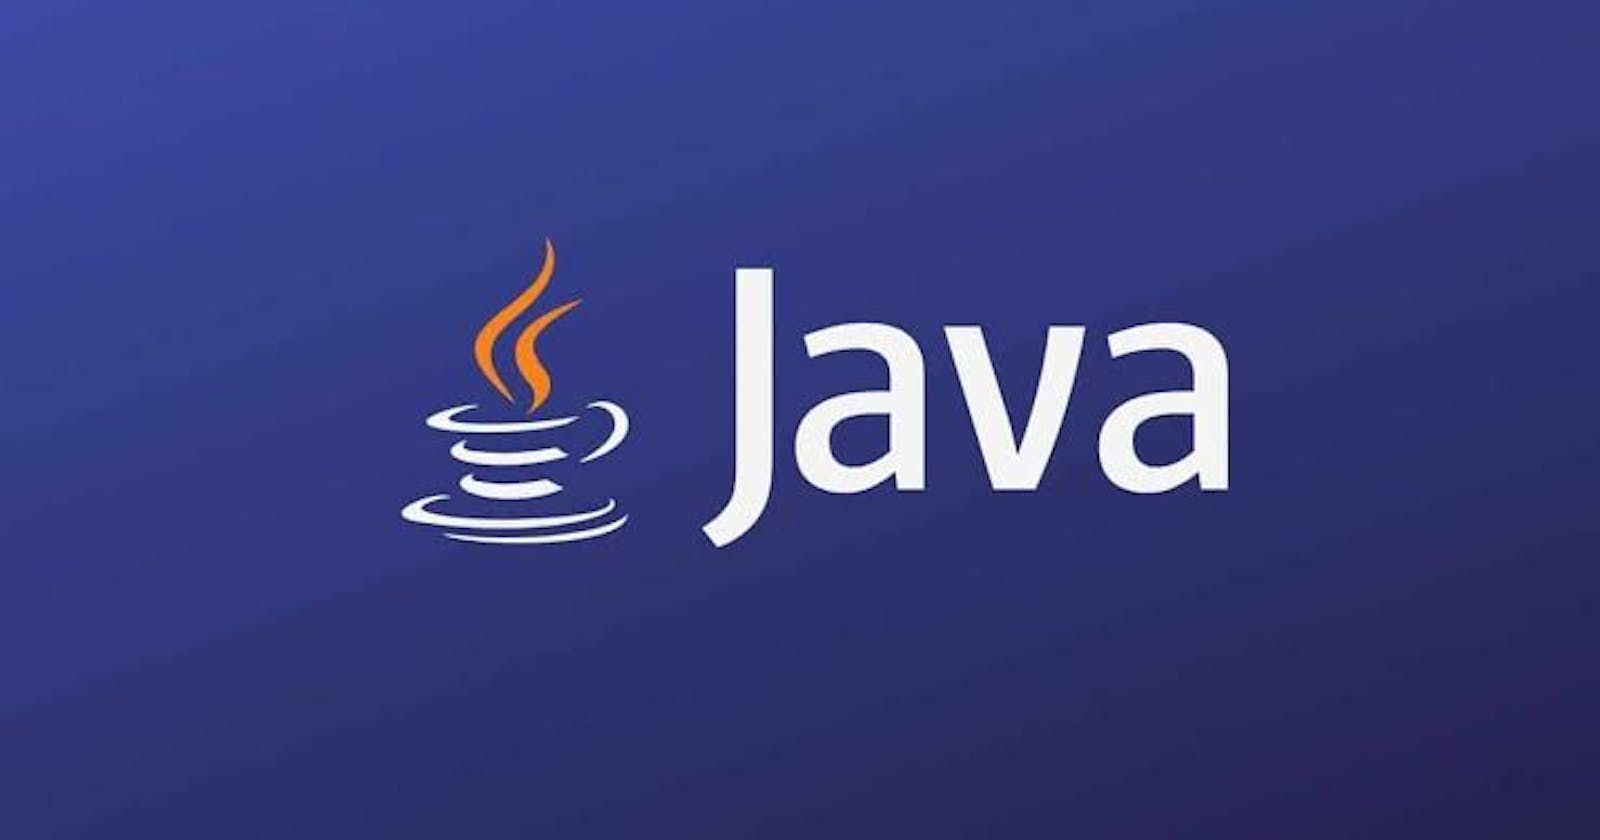 Let’s talk about Java!